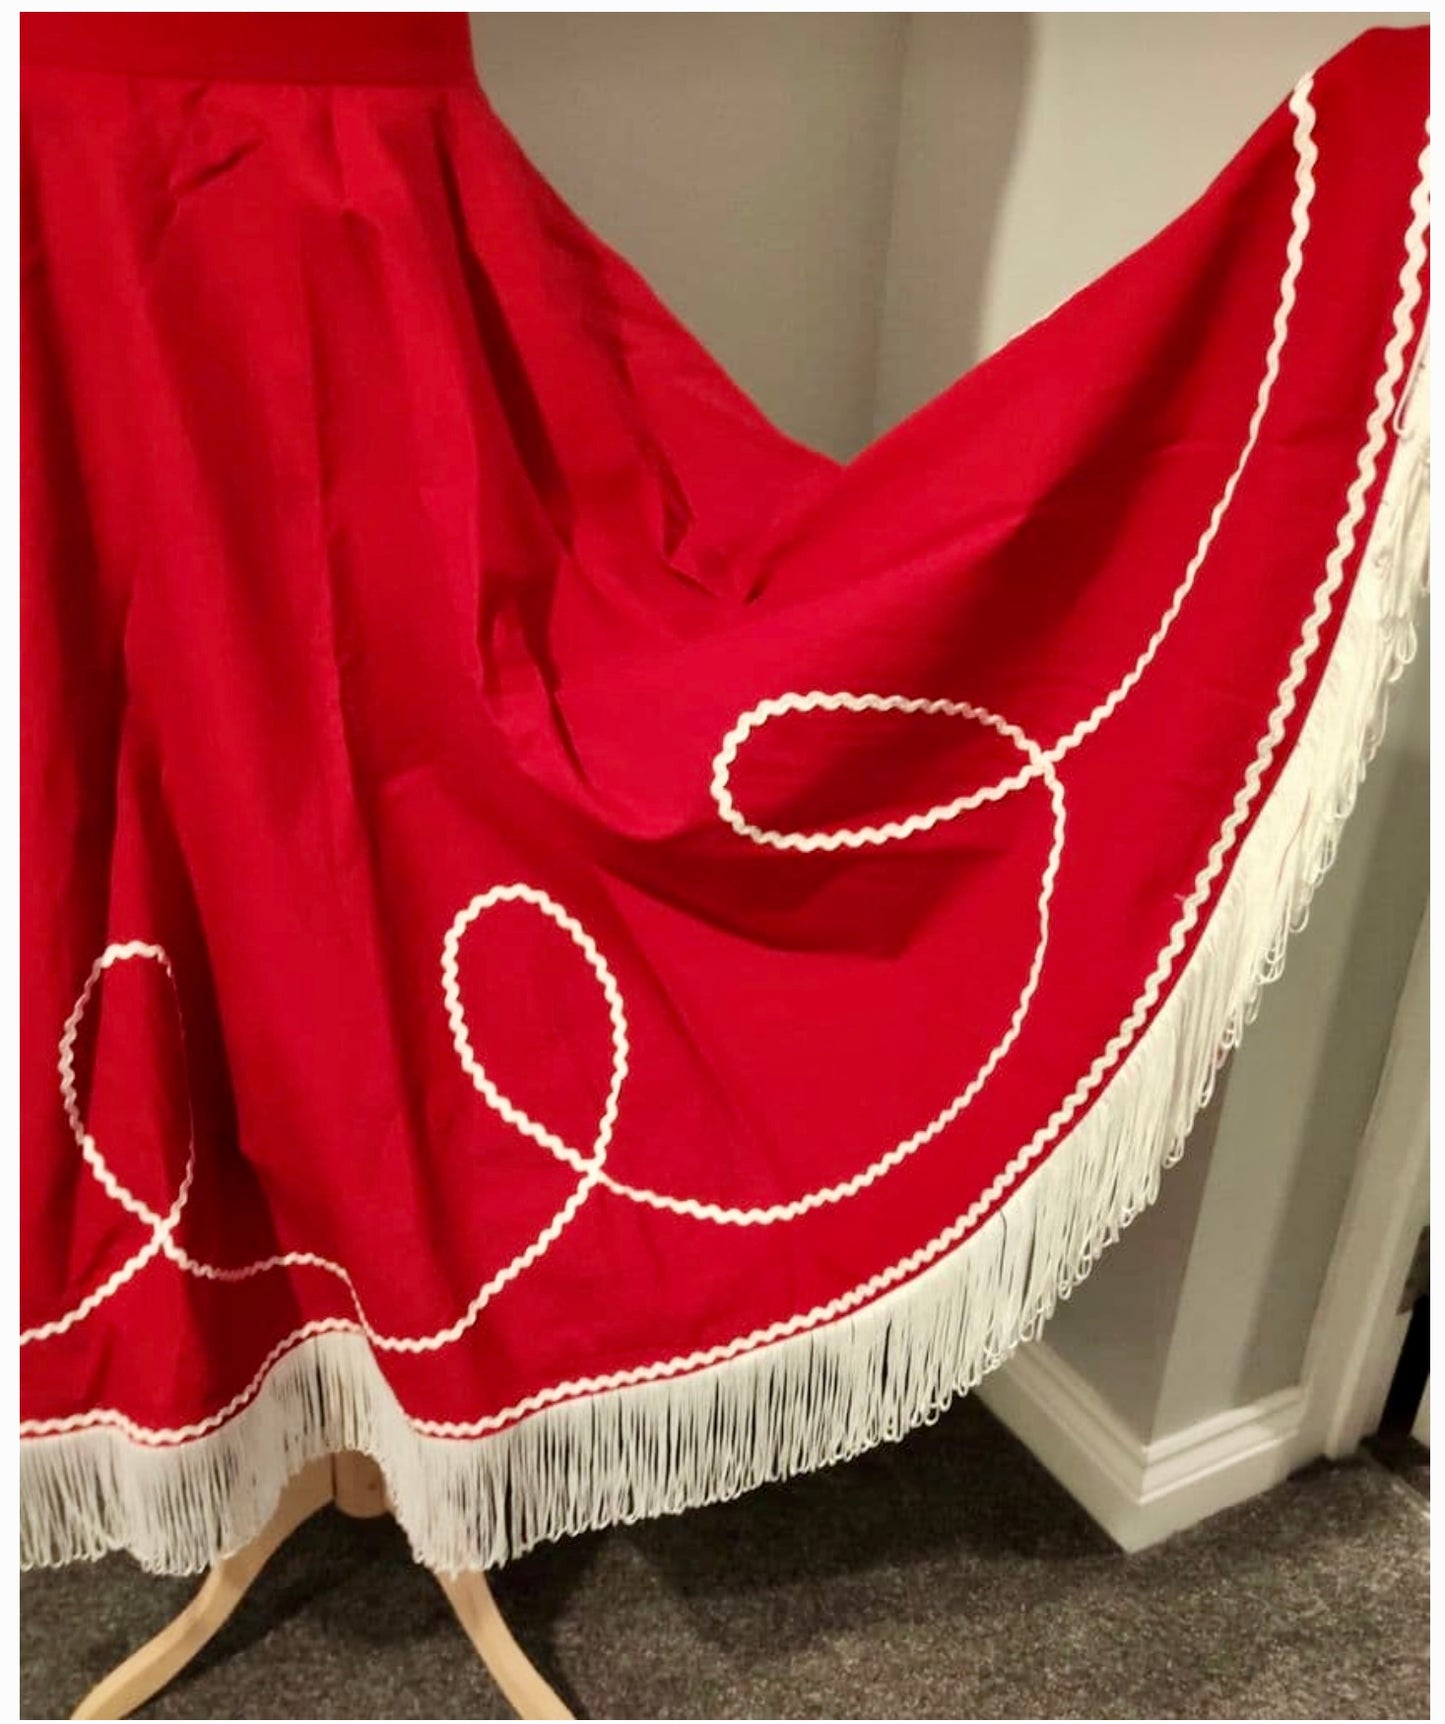 Jessie Vintage 1950s inspired full circle Western style skirt in red and white